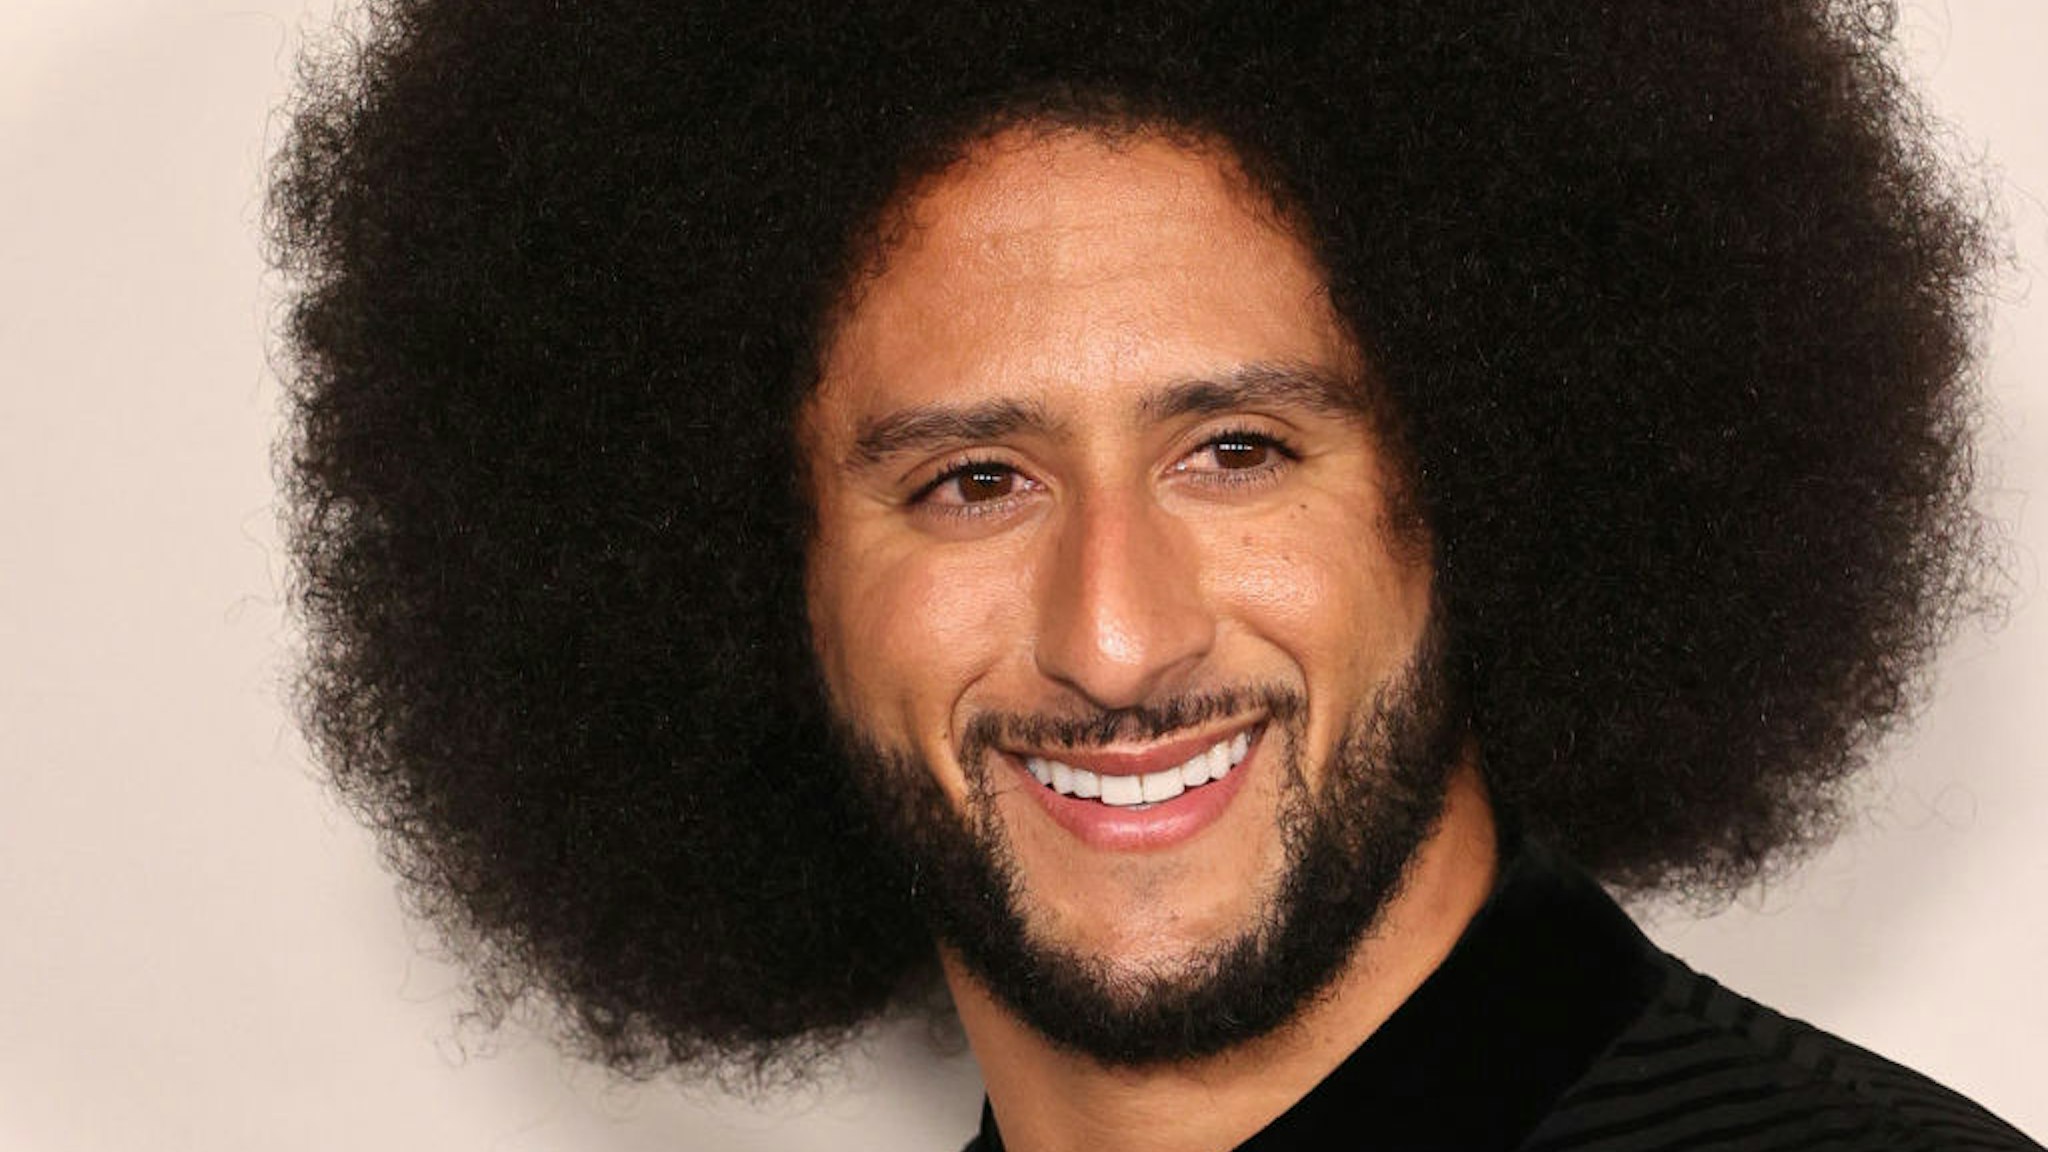 LOS ANGELES, CALIFORNIA - OCTOBER 28: Colin Kaepernick arrives at the Los Angeles premiere of Netflix's "Colin In Black And White" at Academy Museum of Motion Pictures on October 28, 2021 in Los Angeles, California. (Photo by Kevin Winter/WireImage,)